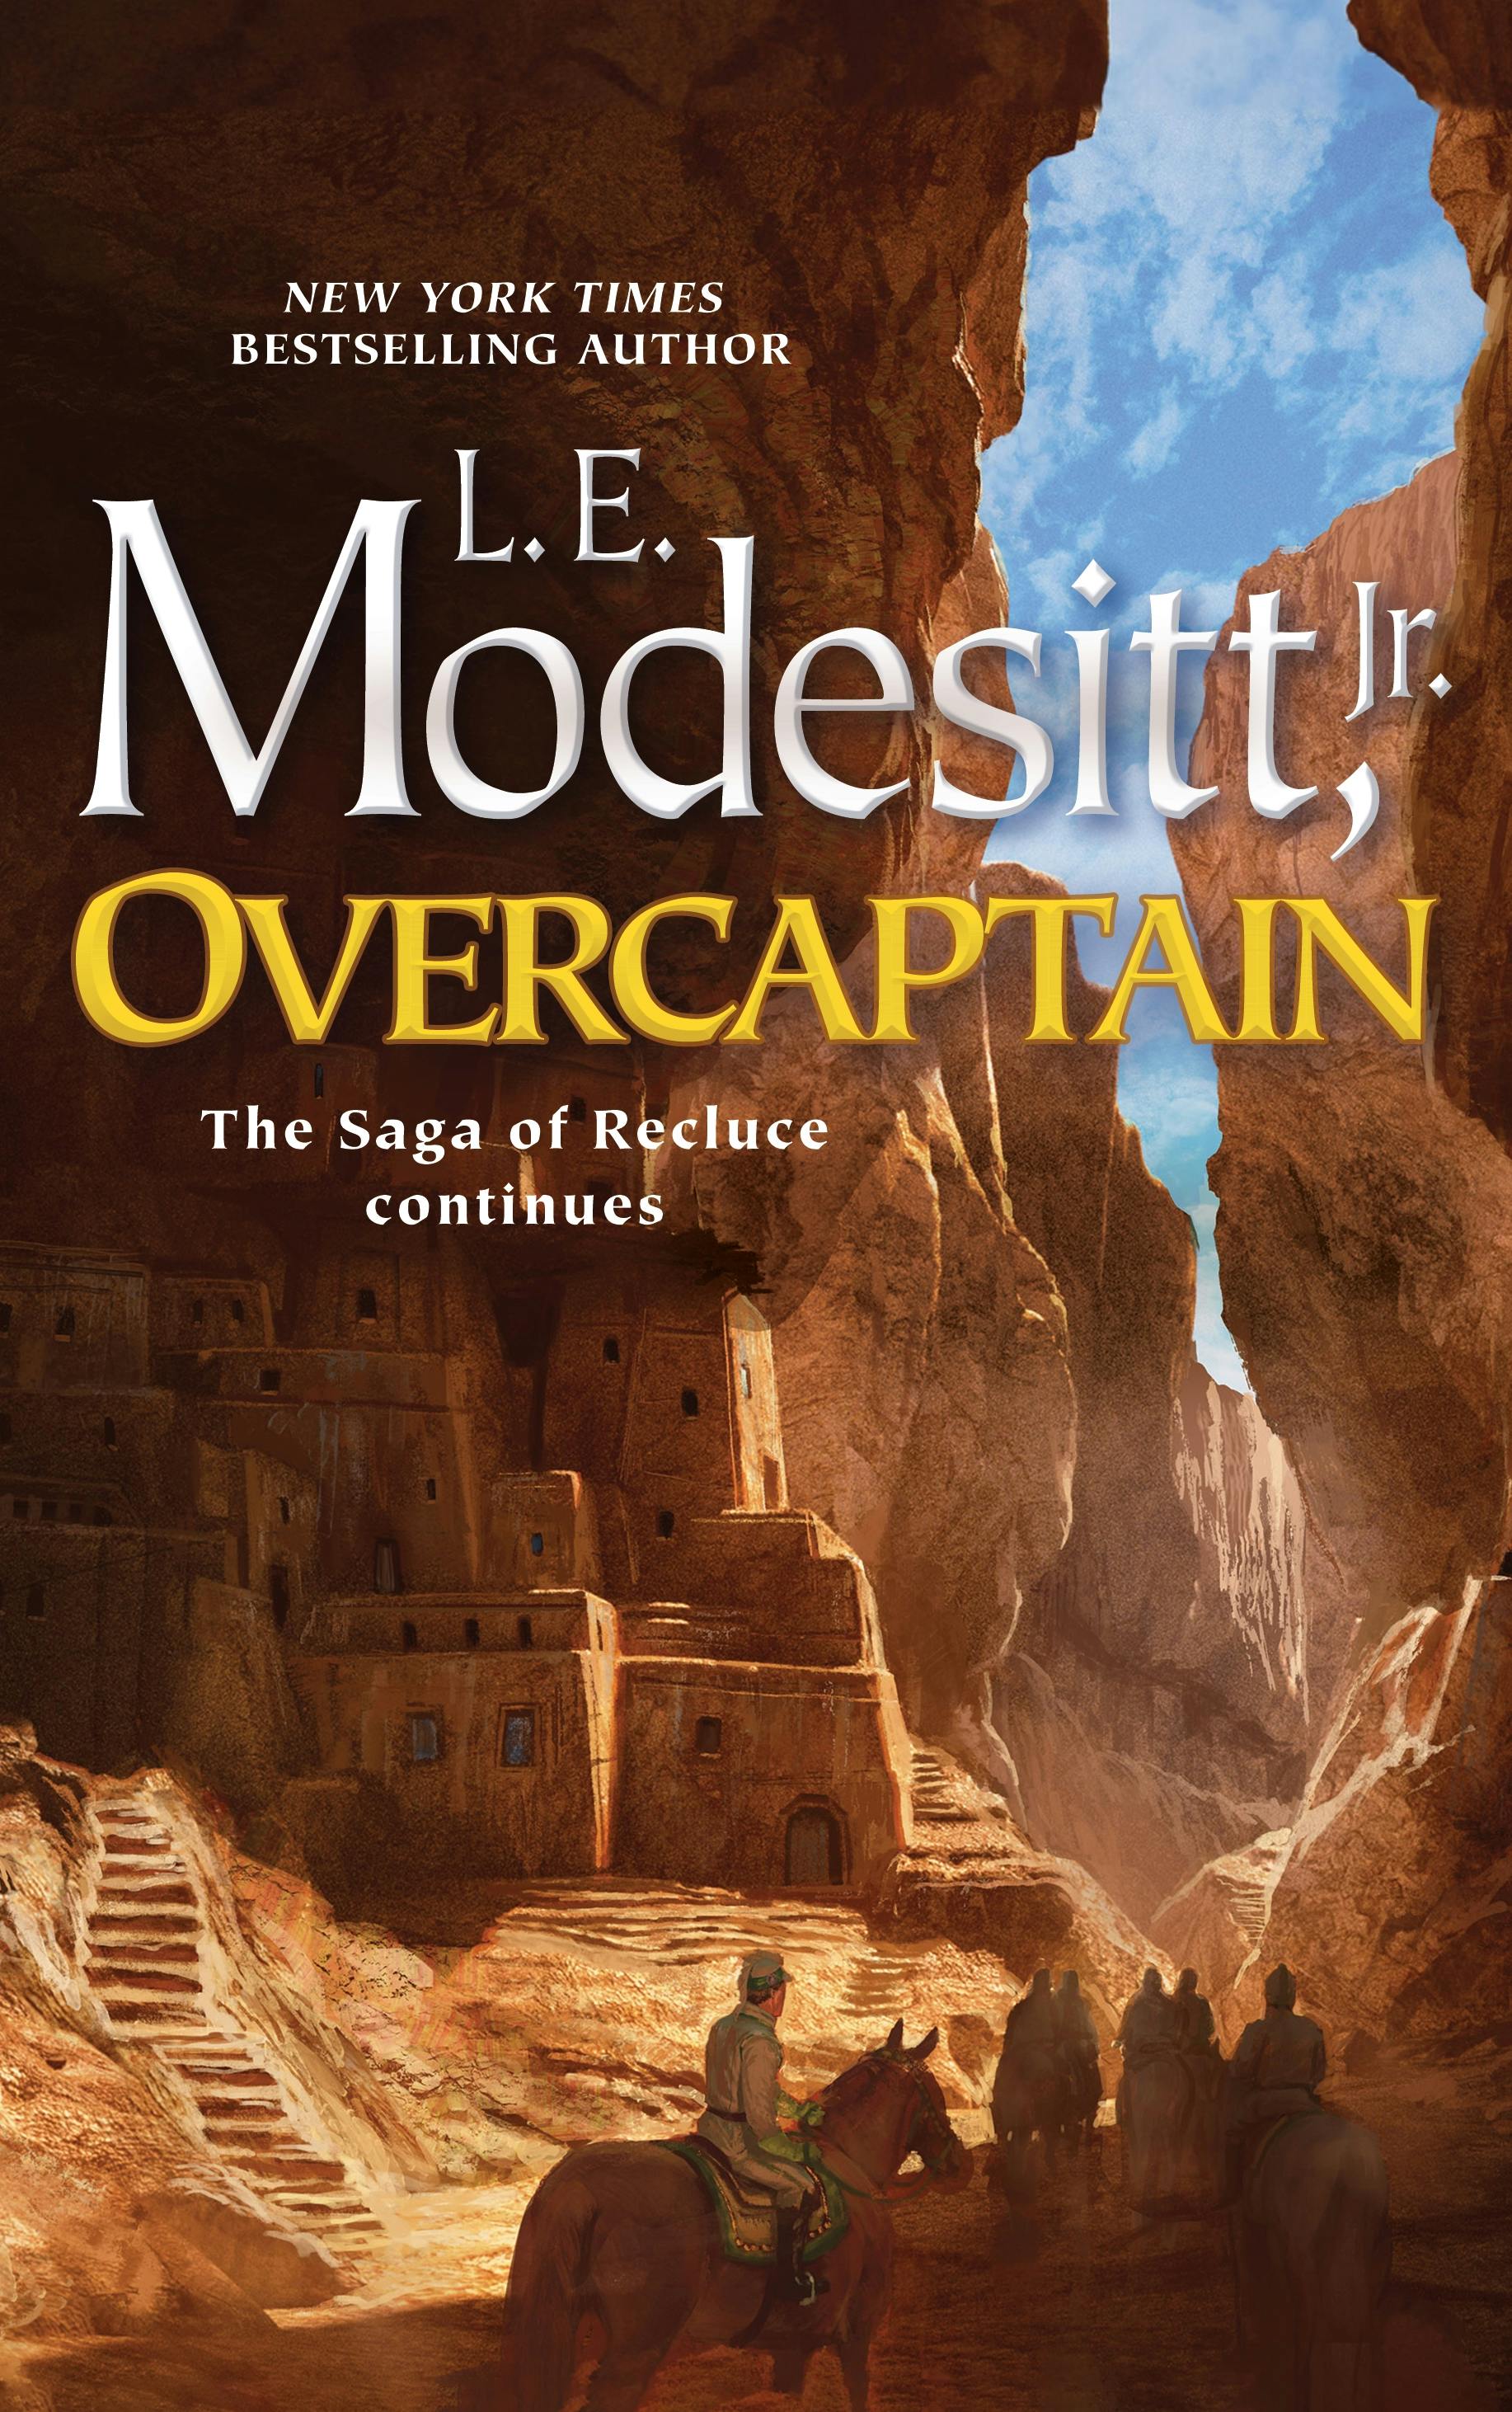 Cover for the book titled as: Overcaptain